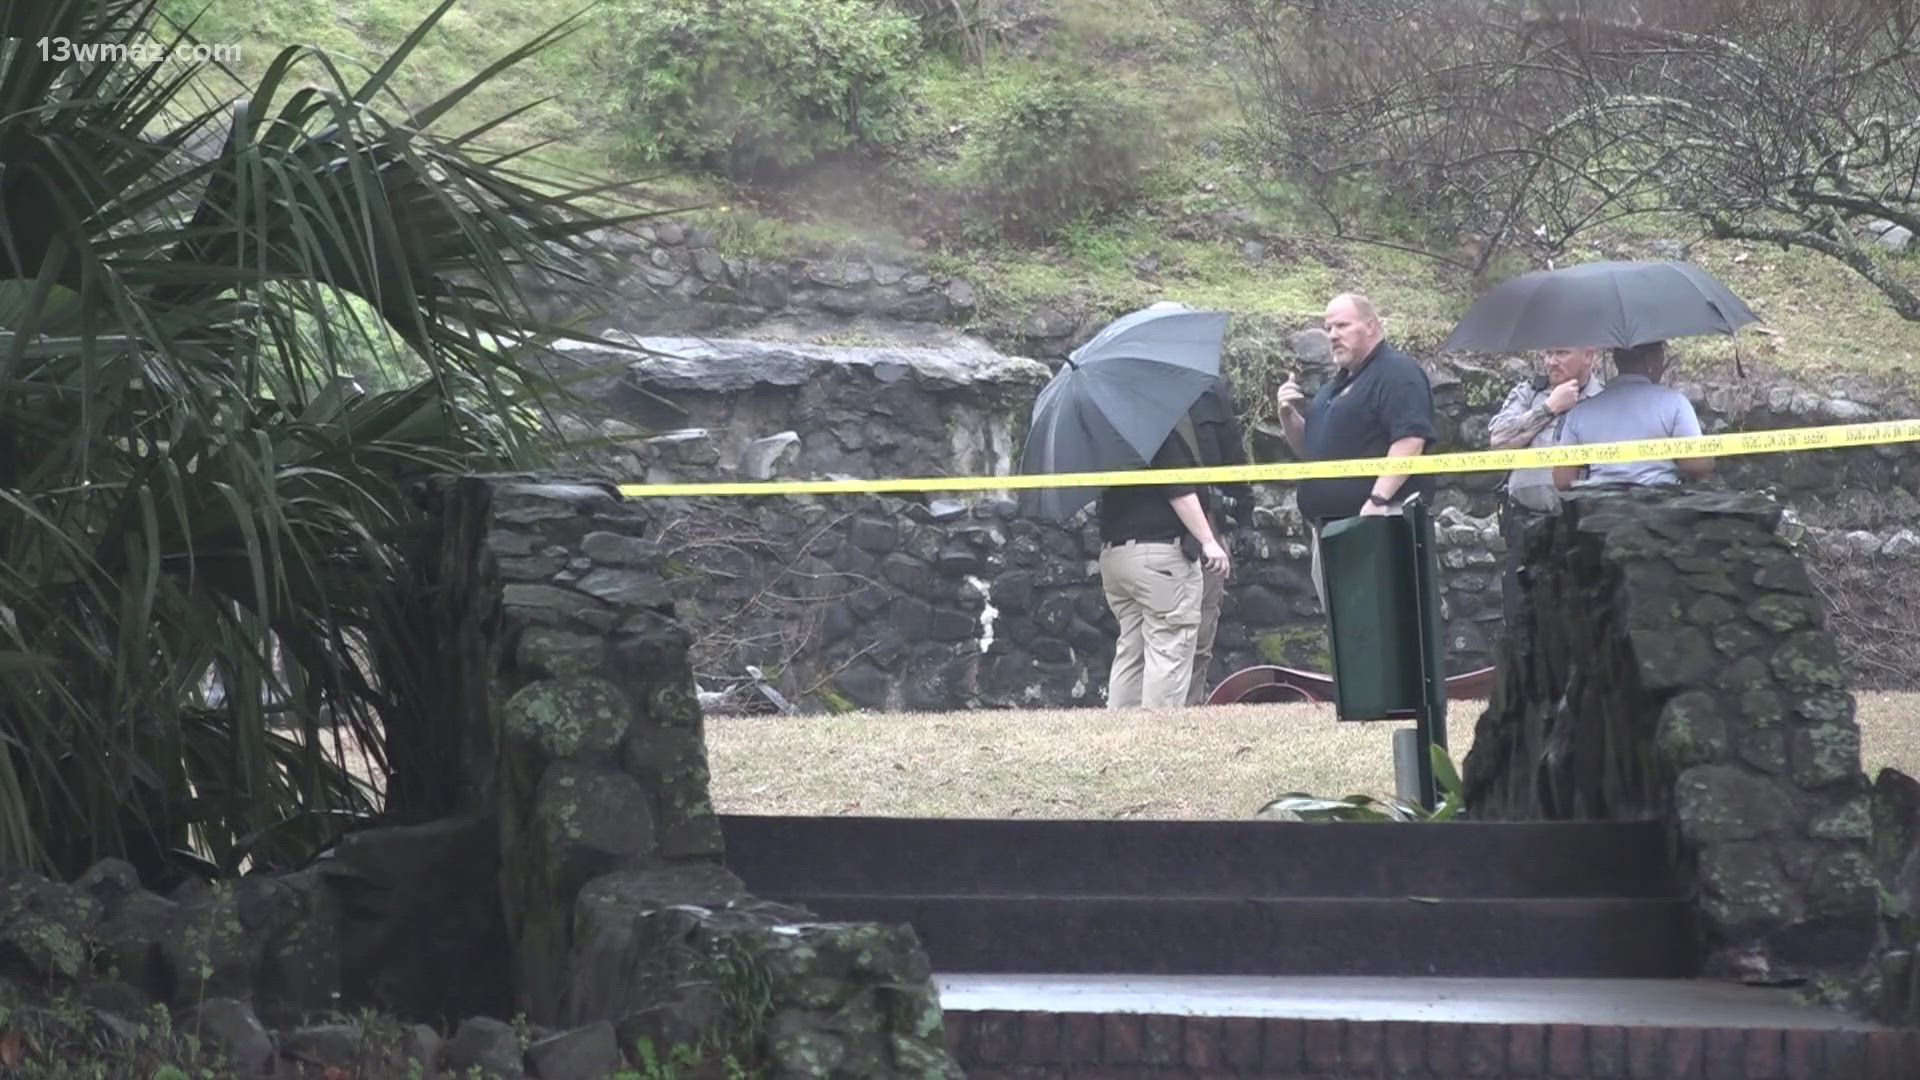 Bibb County Coroner Leon Jones says a passerby found the body face down in the park Tuesday afternoon.